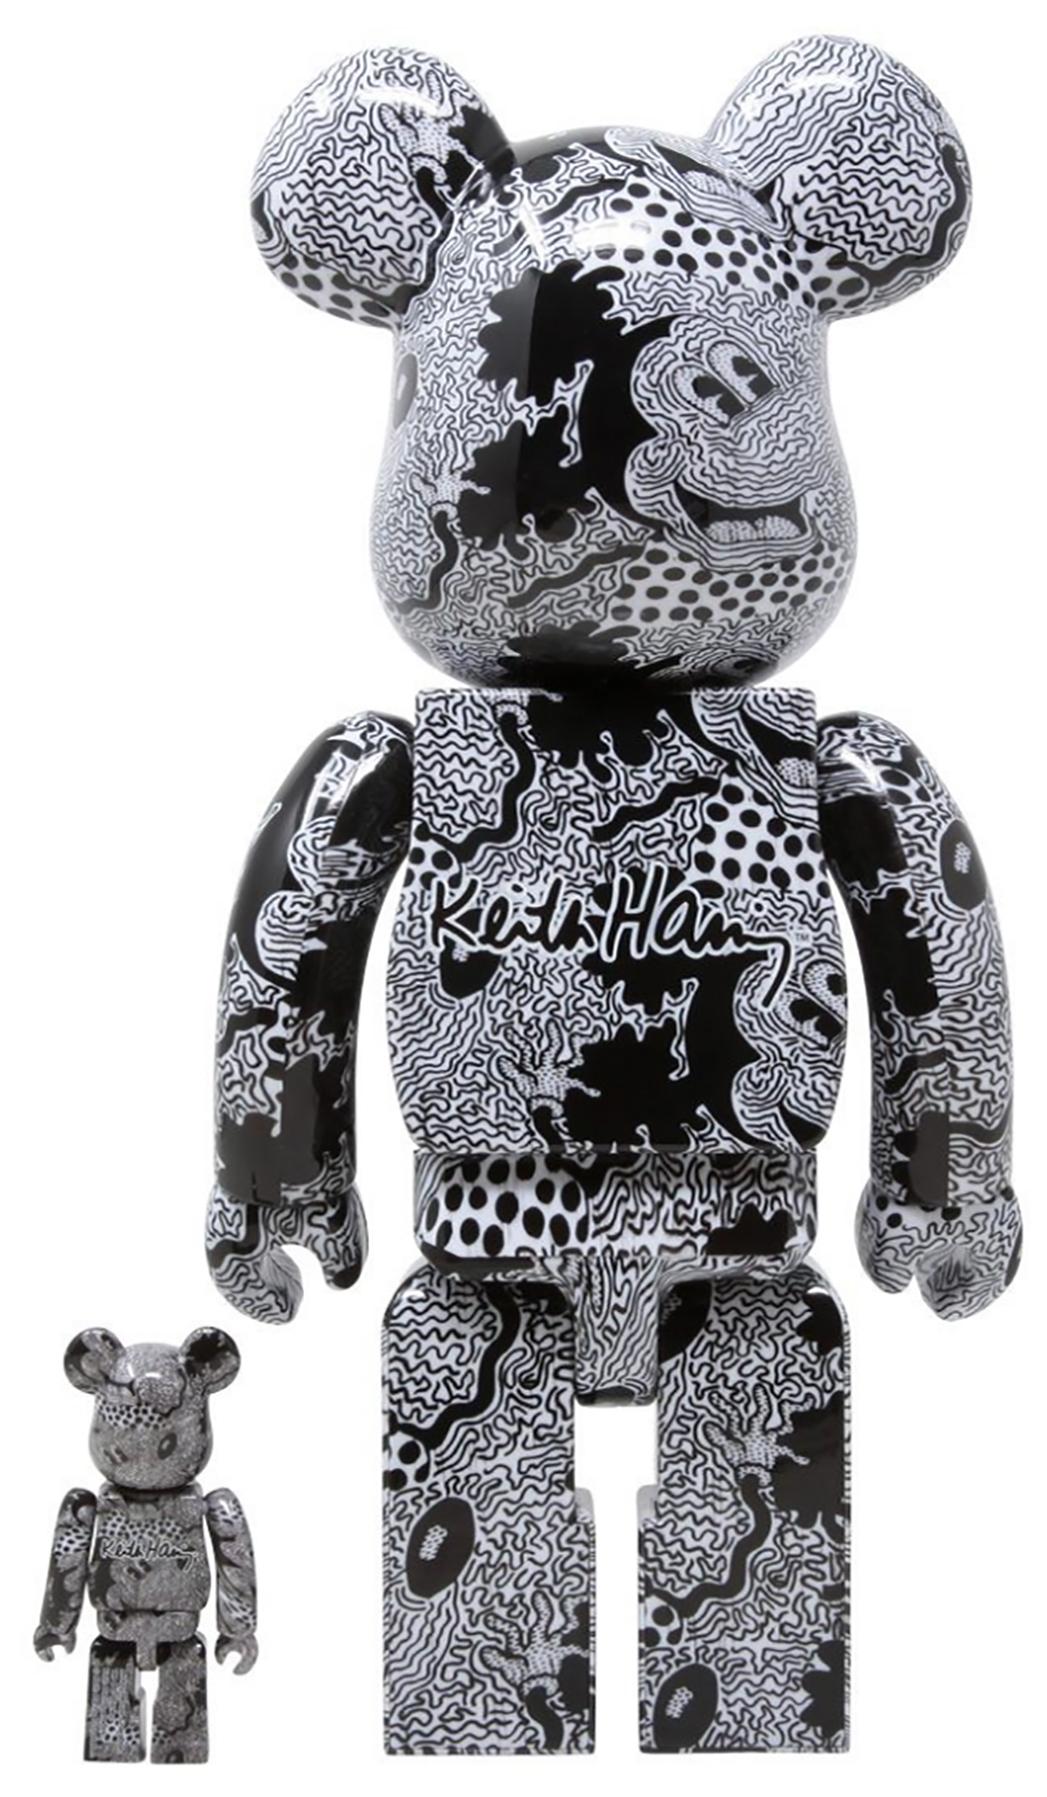 Keith Haring Bearbrick 400 % compagnon (Haring Mickey Mouse BE@RBRICK) - Sculpture de (after) Keith Haring